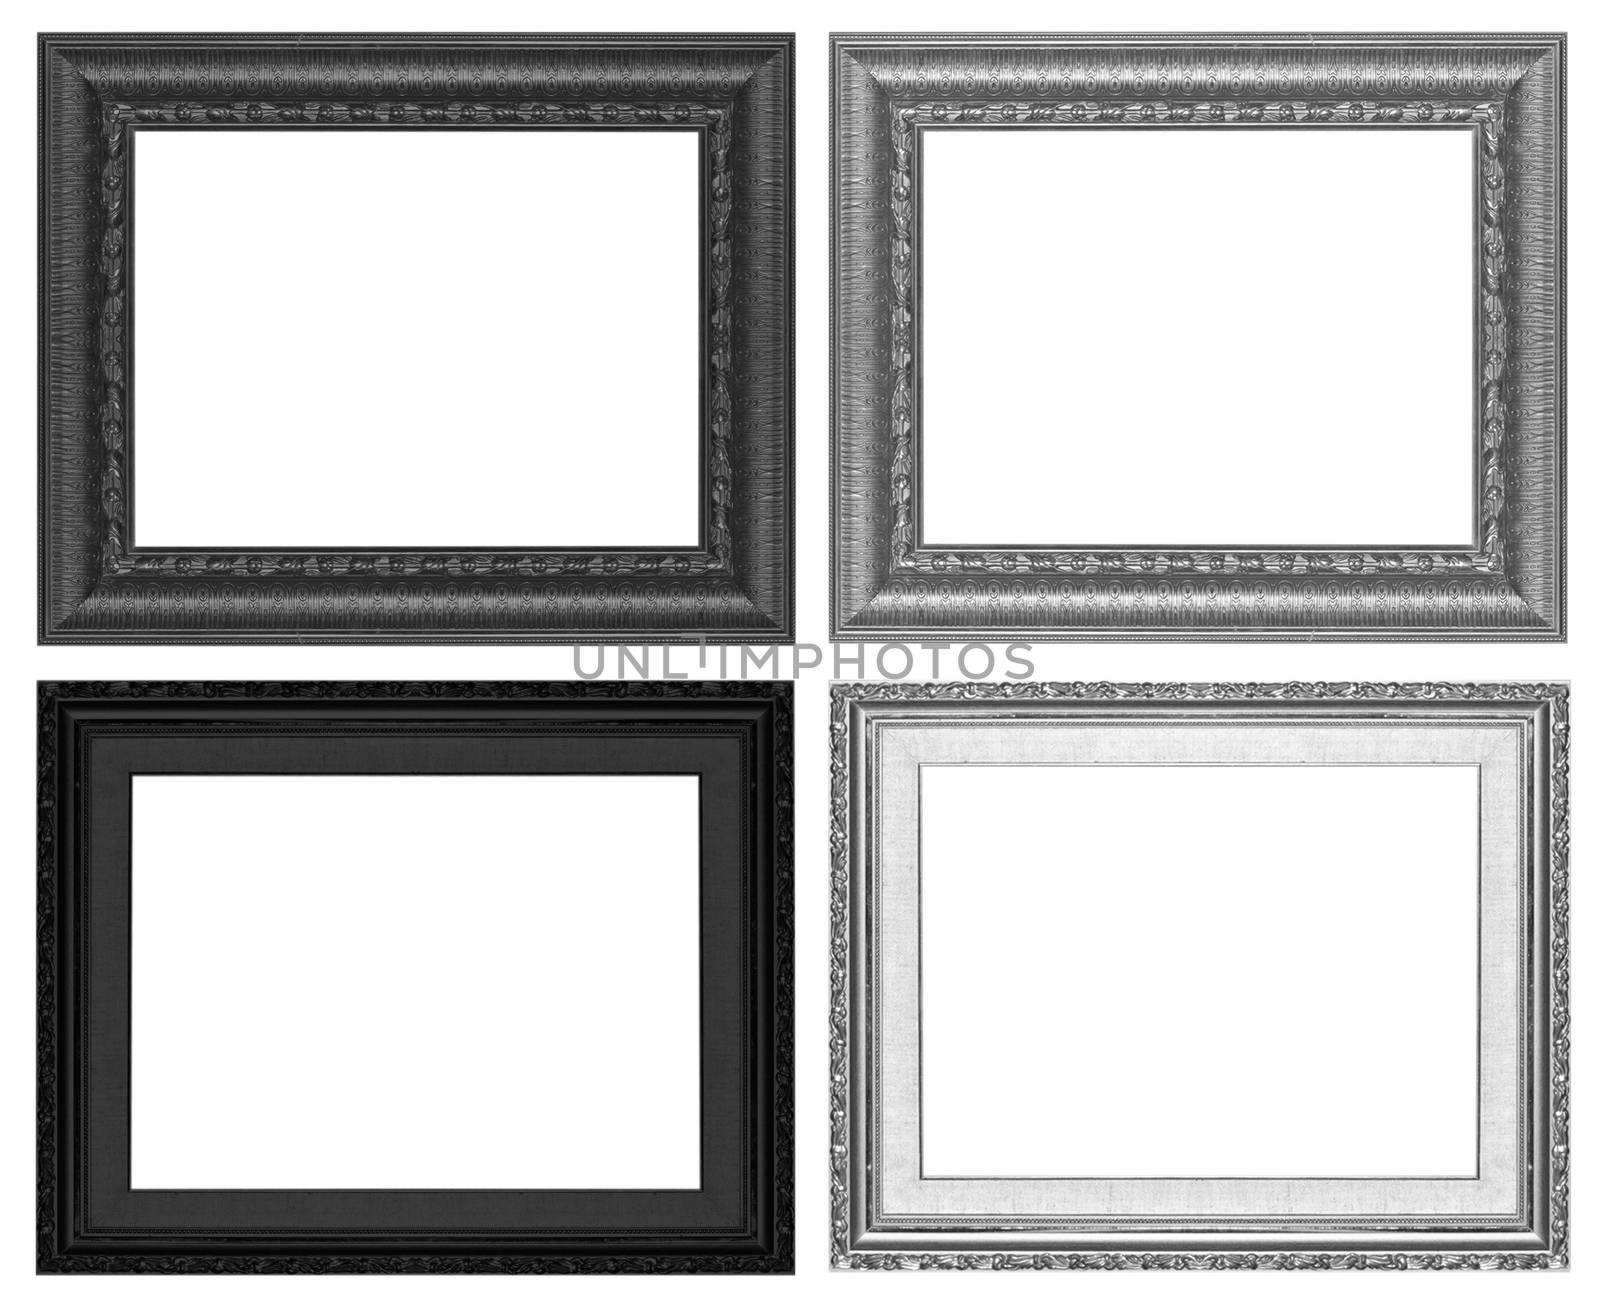 Old antique wooden frame isolated on white background.